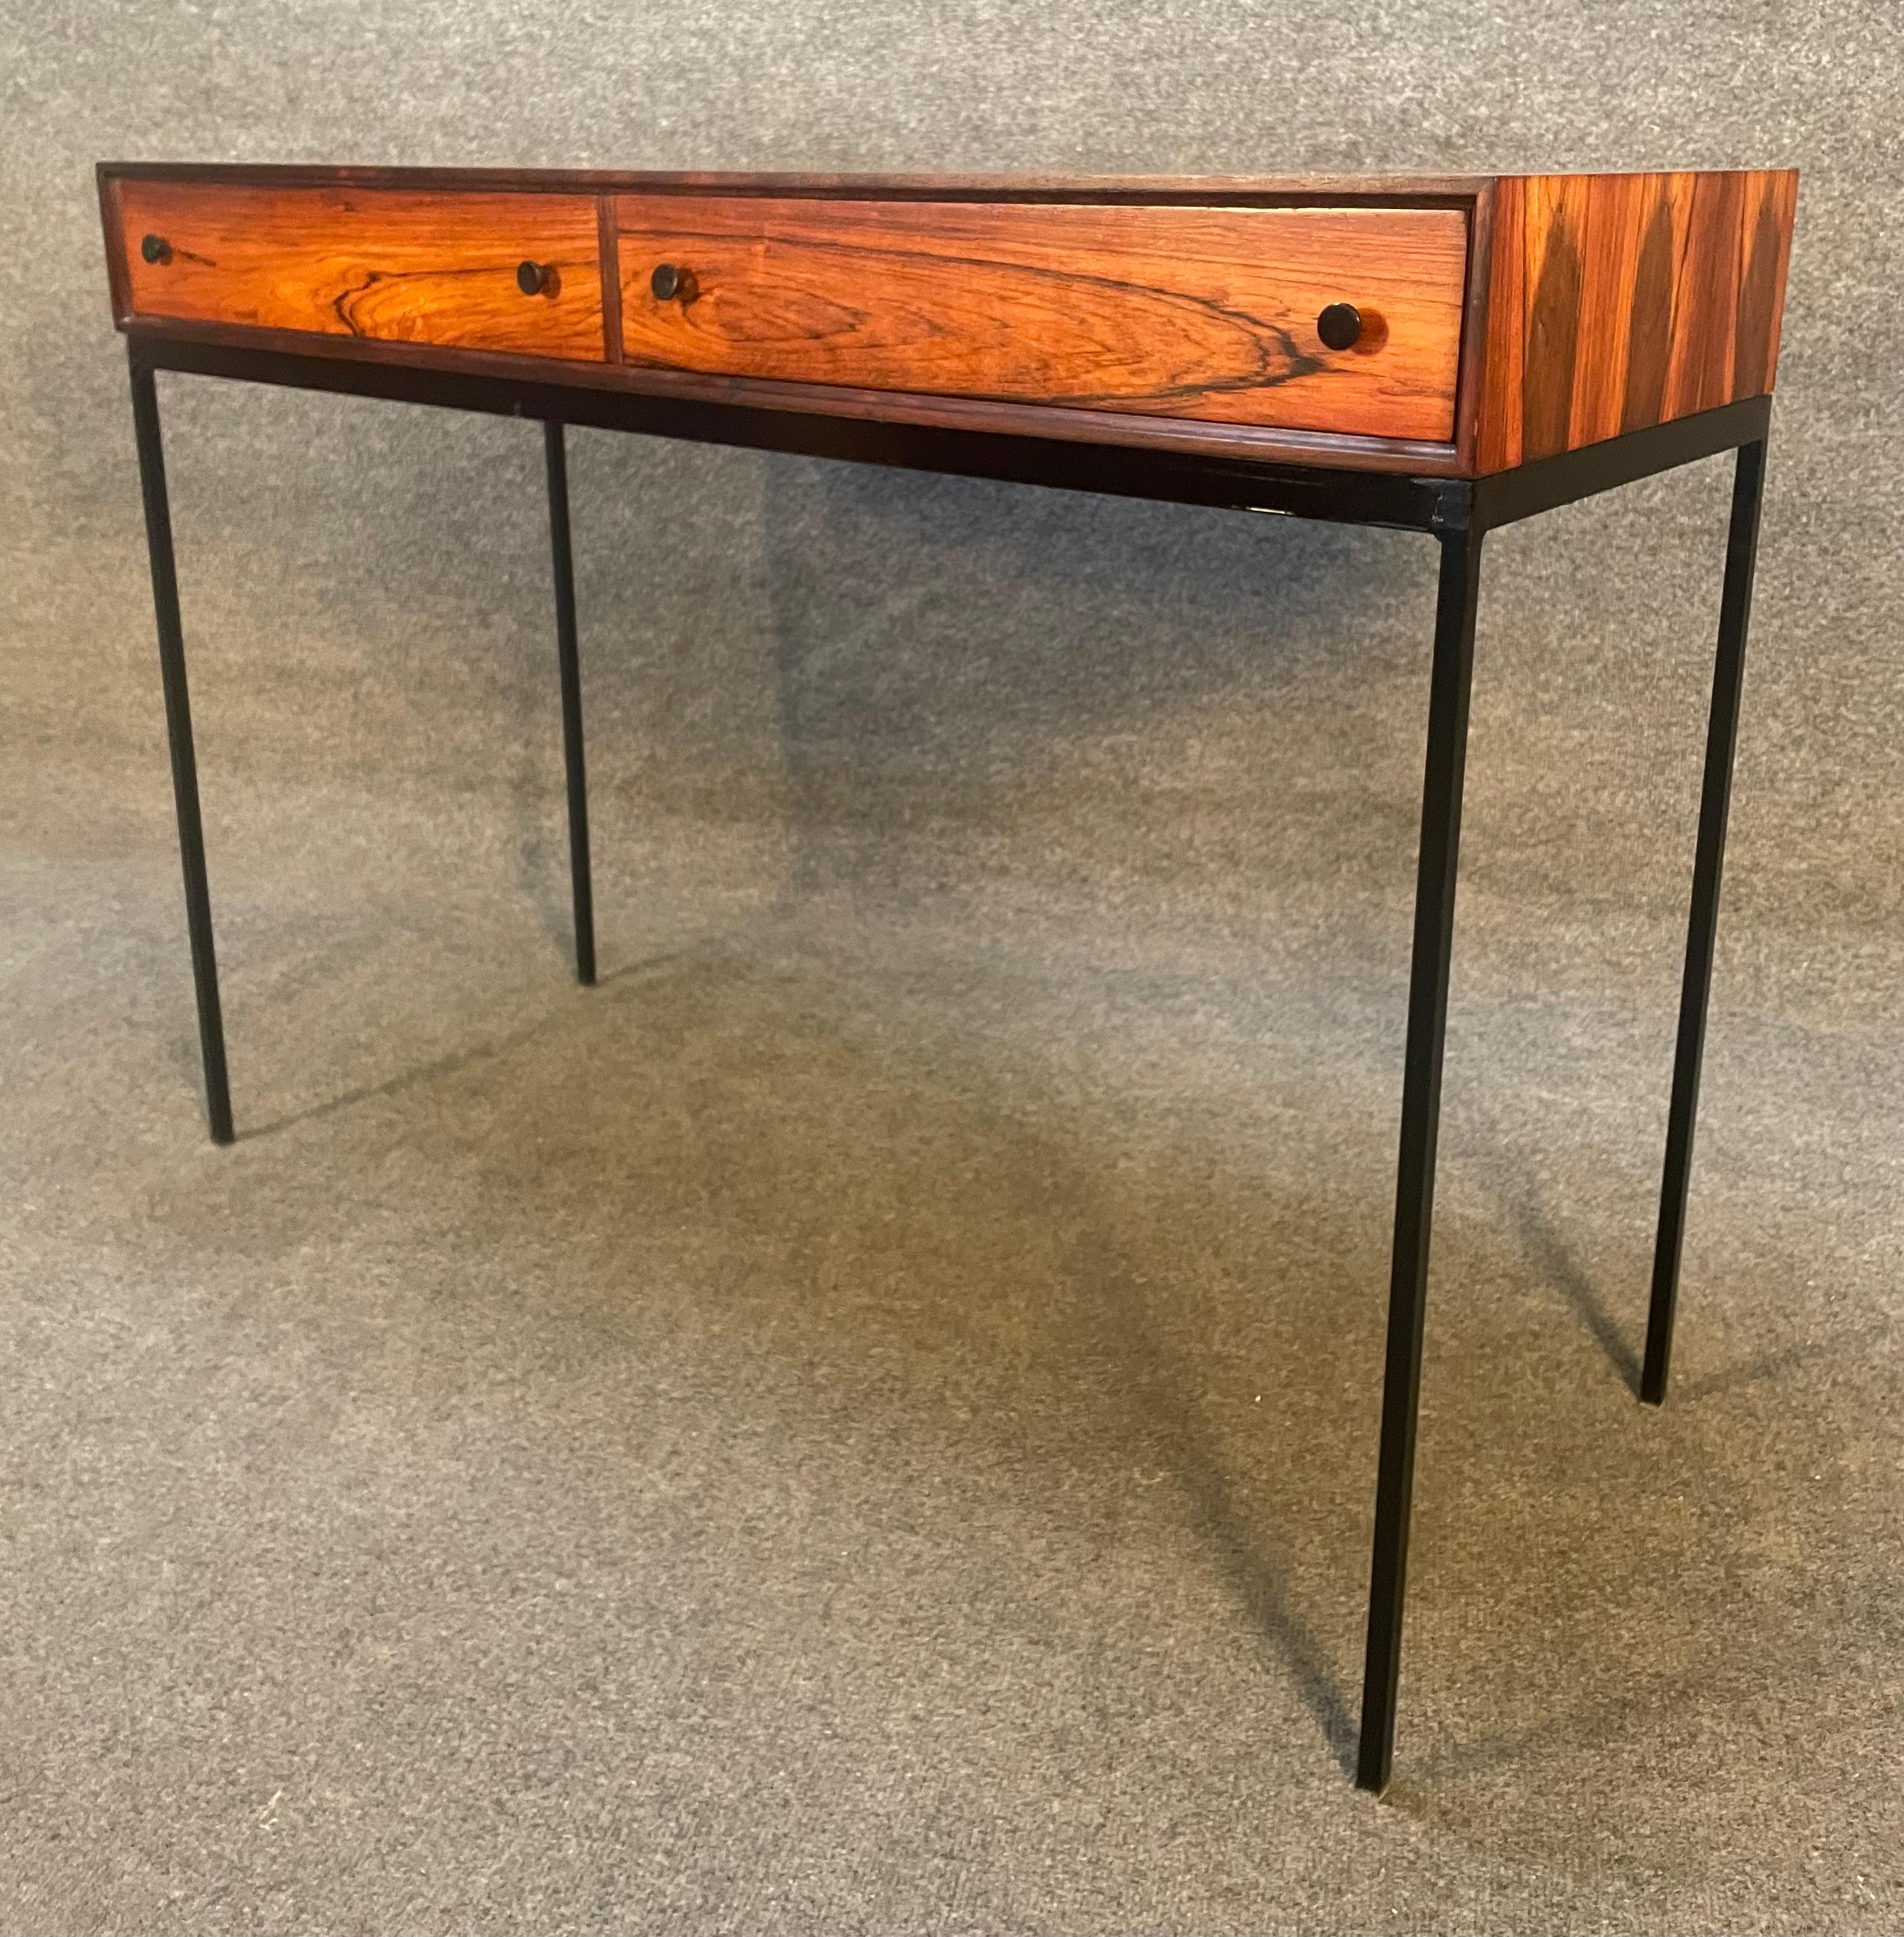 Mid-20th Century Vintage Danish Mid-Century Modern Rosewood Entry Way Console by Poul Norreklit